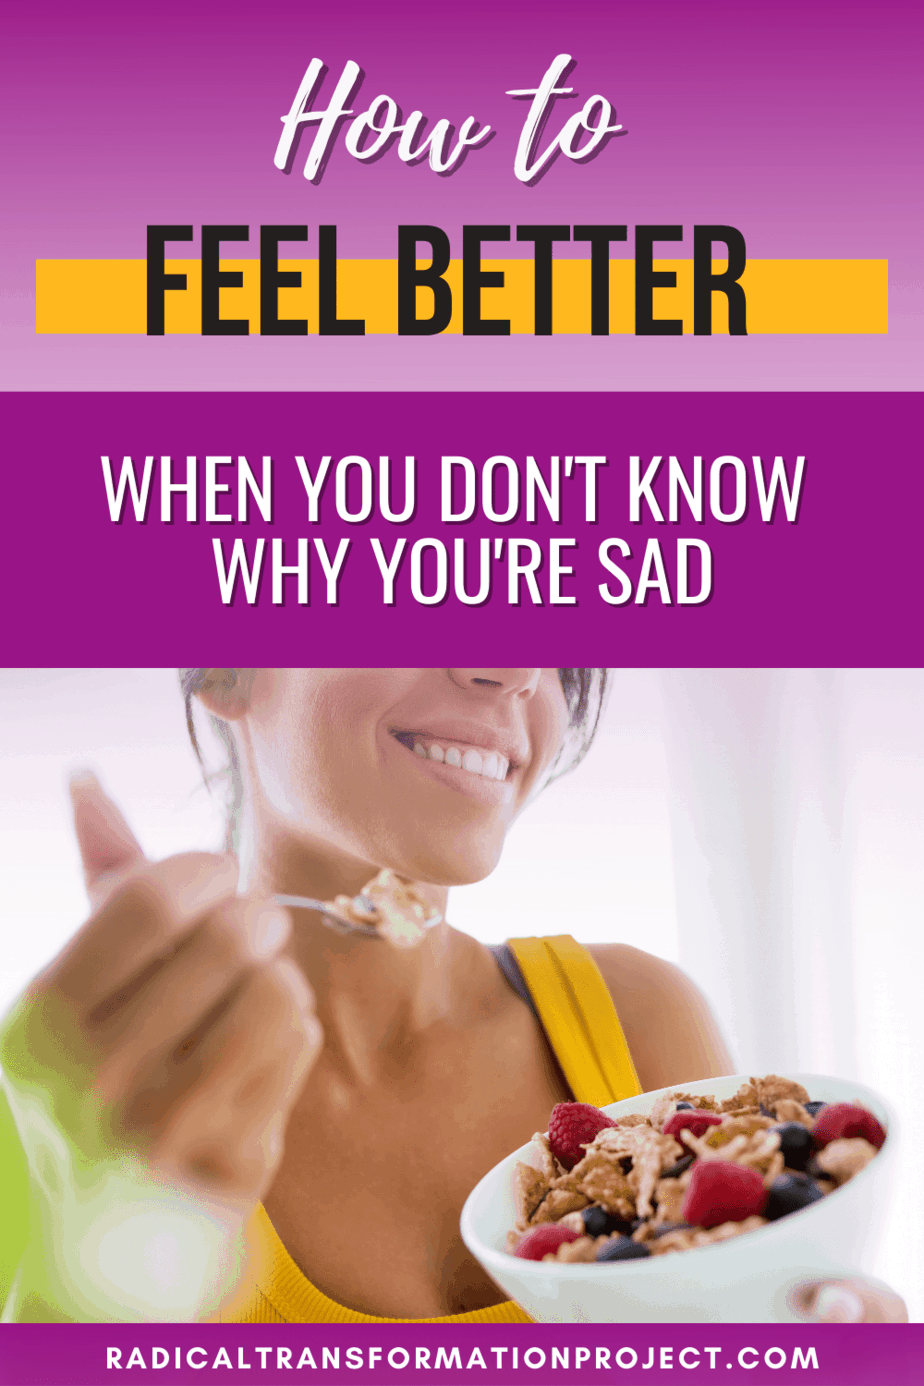 How To Feel Better When You Don't Know Why You Are Sad